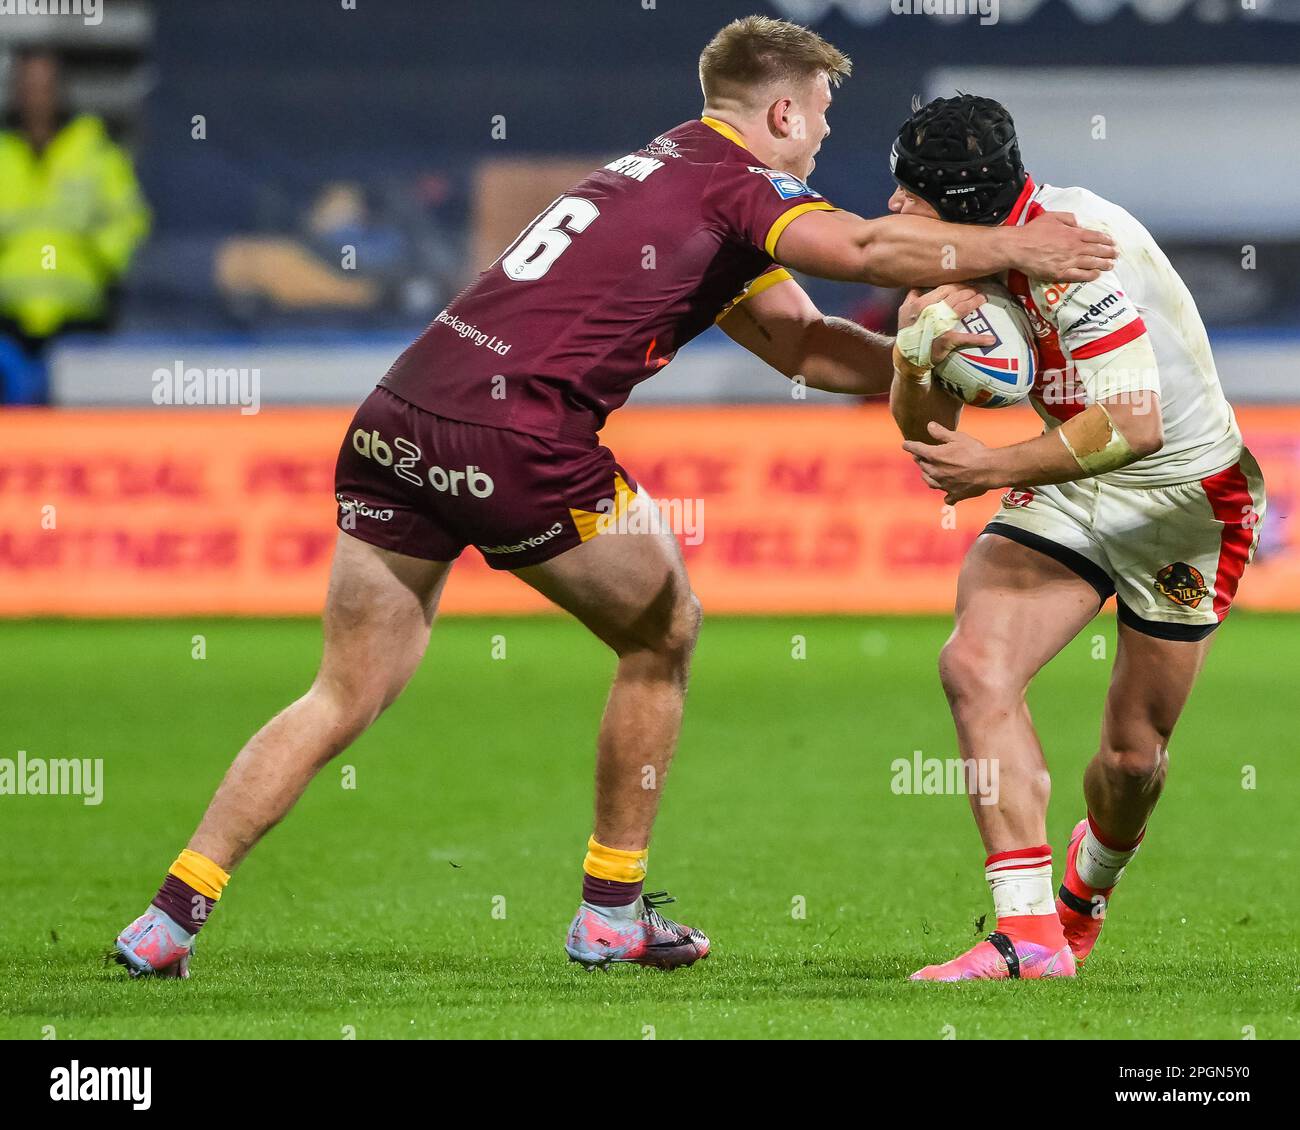 Jonny Lomax #6 of St Helens receives a hi tackle from Harry Rushton #16 of Huddersfield Giants during the Betfred Super League Round 6 match Huddersfield Giants vs St Helens at John Smith's Stadium, Huddersfield, United Kingdom, 23rd March 2023  (Photo by Craig Thomas/News Images) Stock Photo